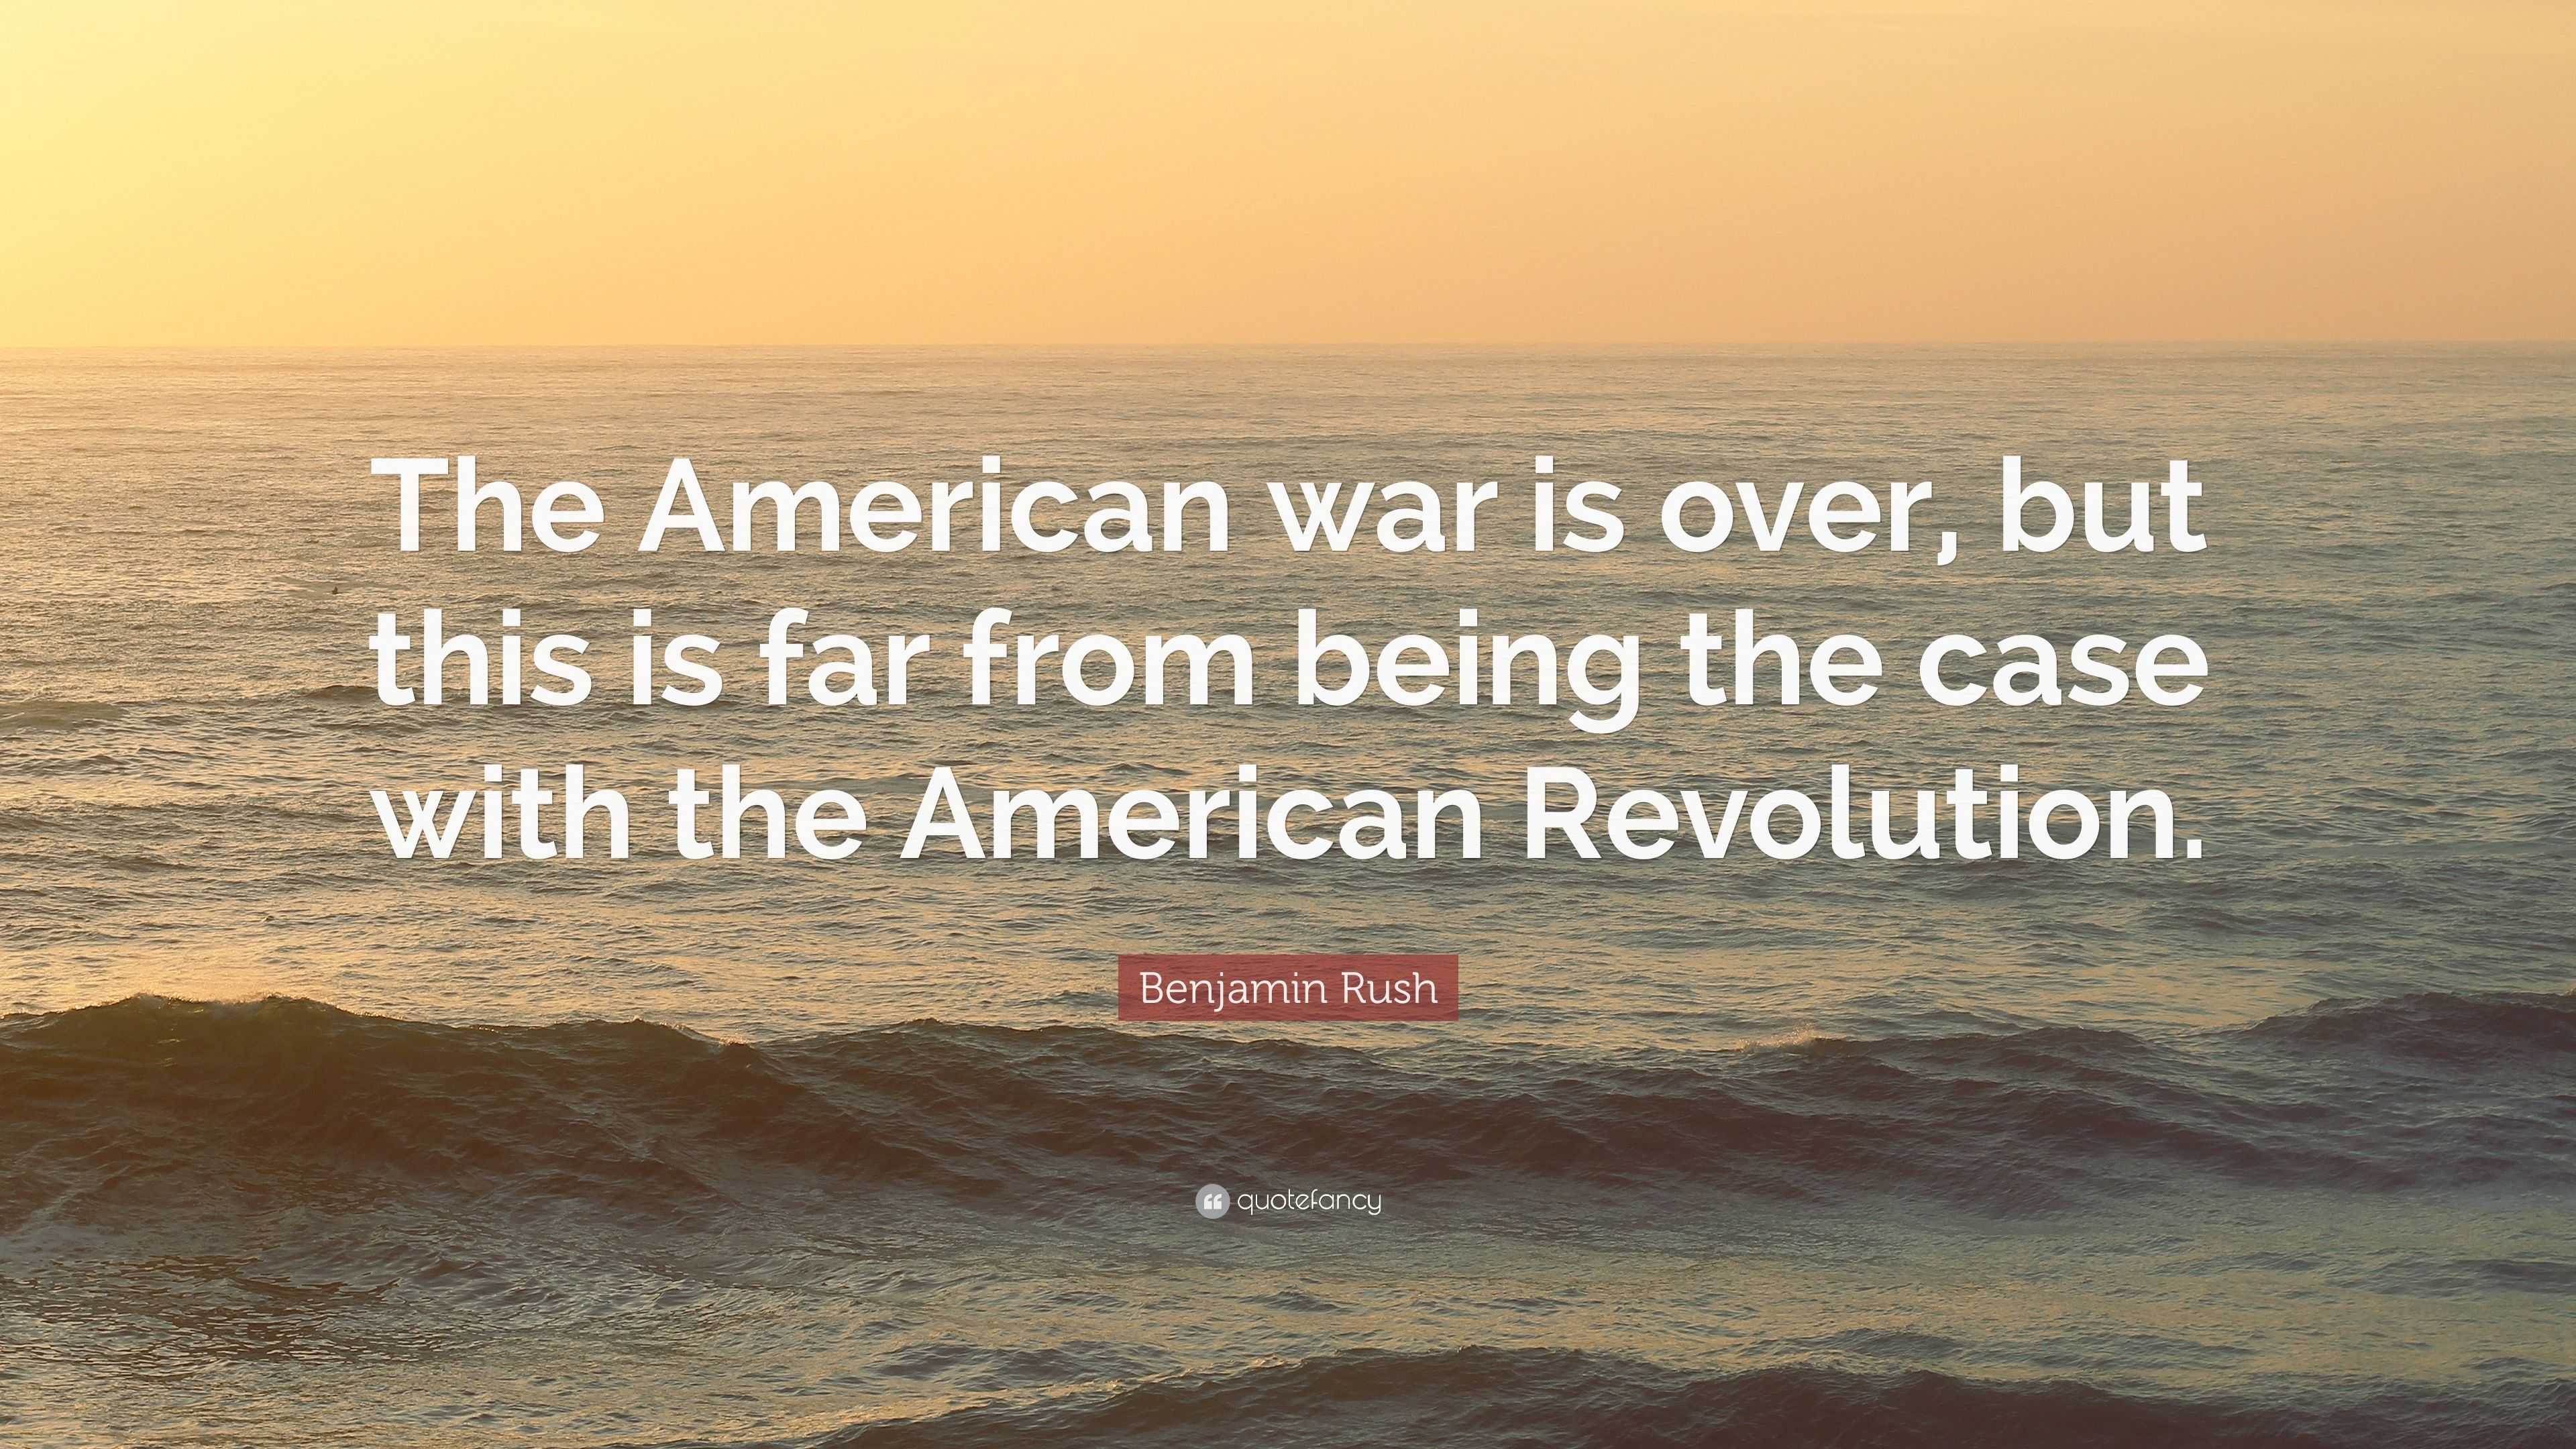 Benjamin Rush Quote “The American war is over, but this